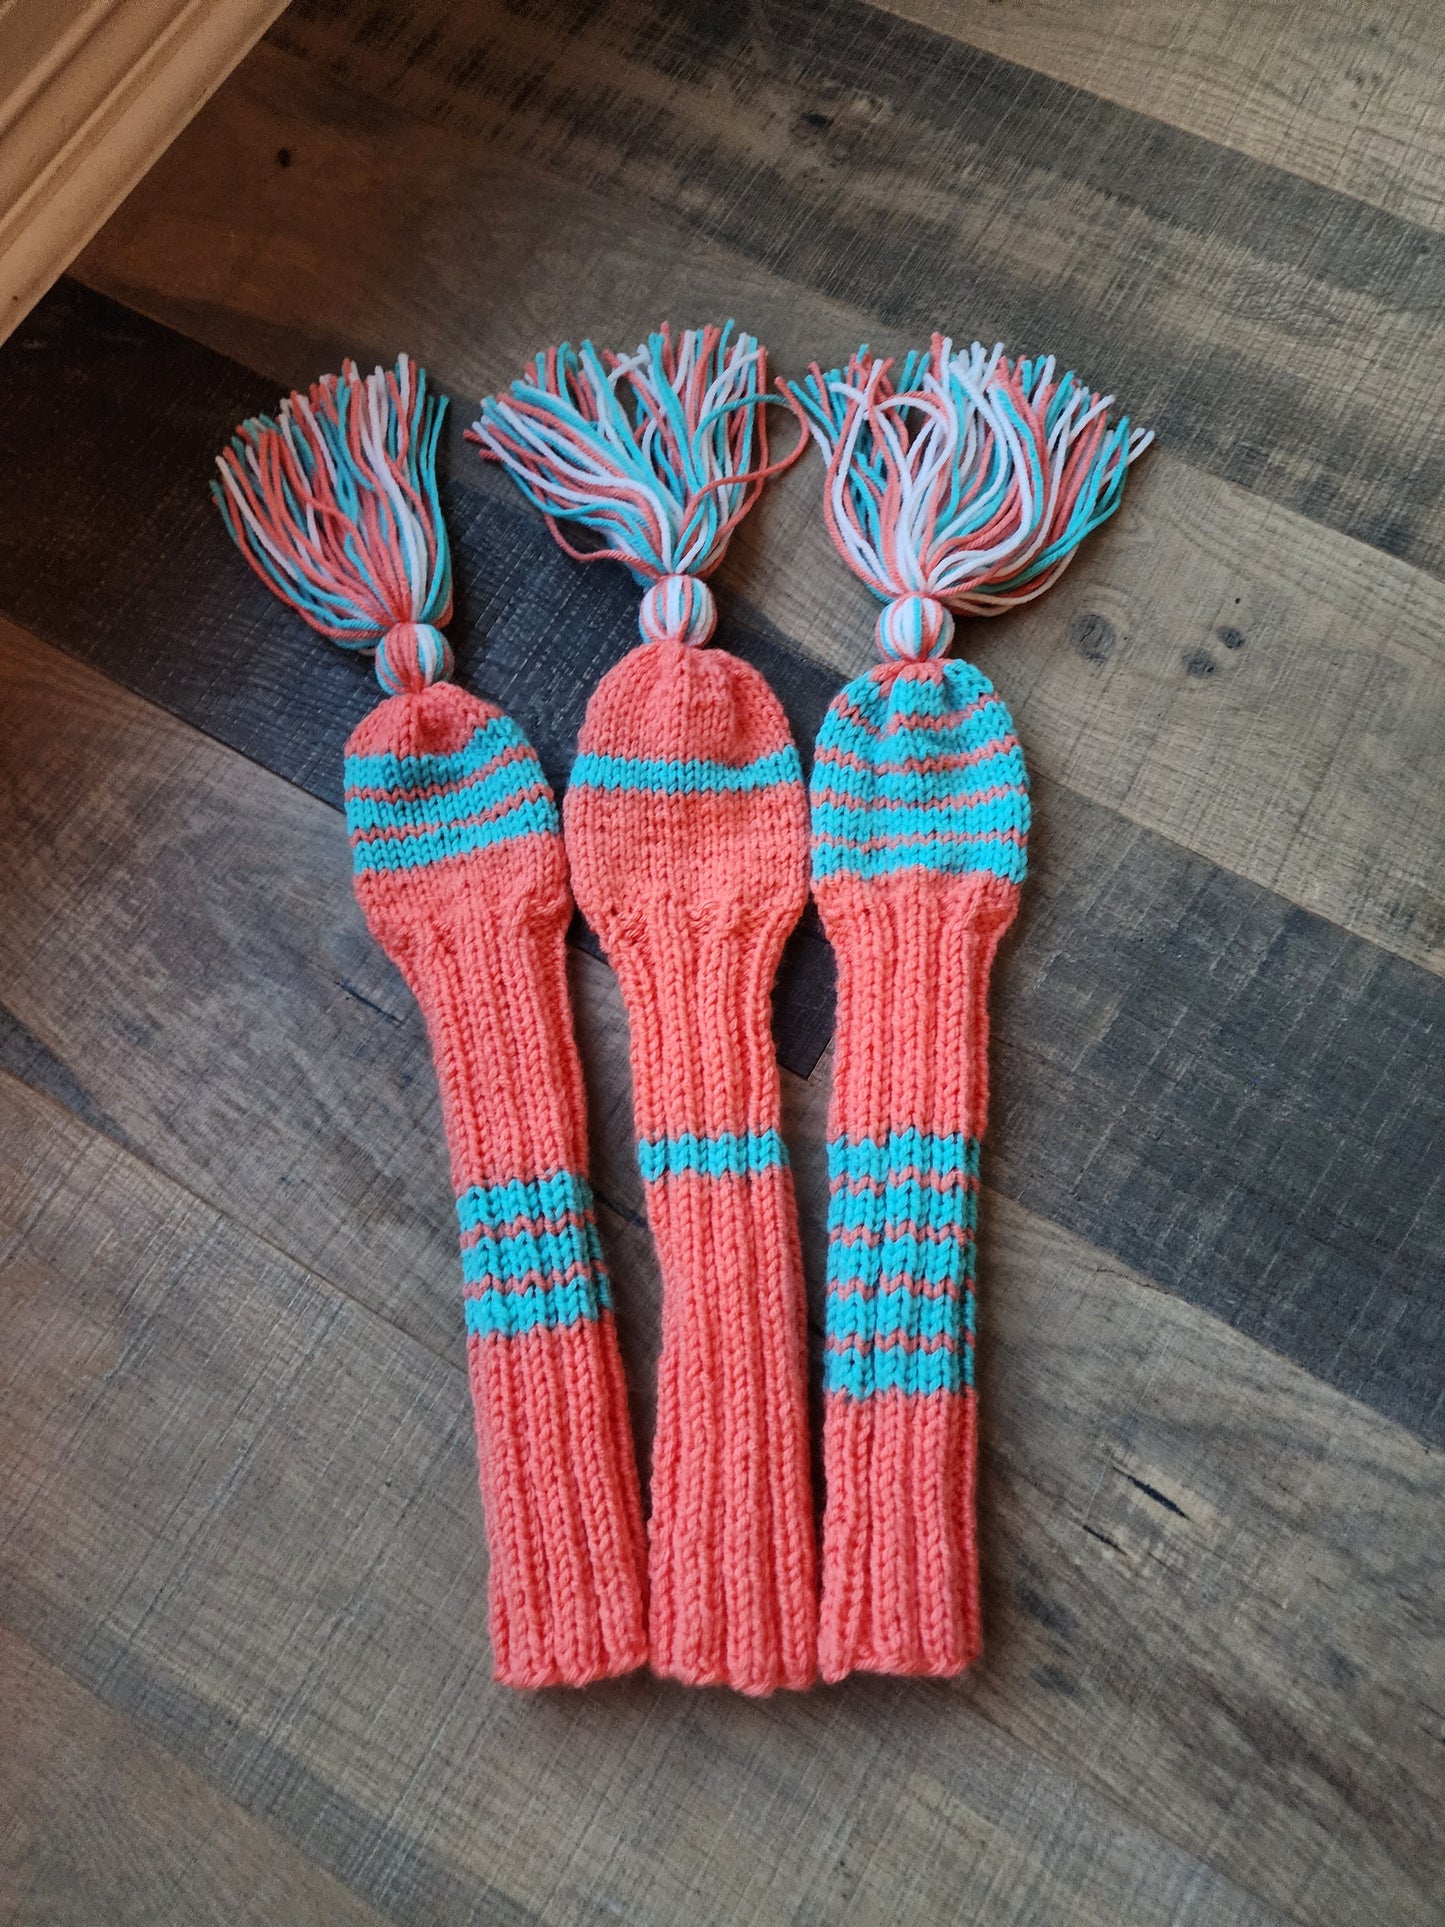 Three Golf Club Head Covers Retro-Vintage Orange, Blue & White with Tassels for Drivers, Woods - Austinknittylimits